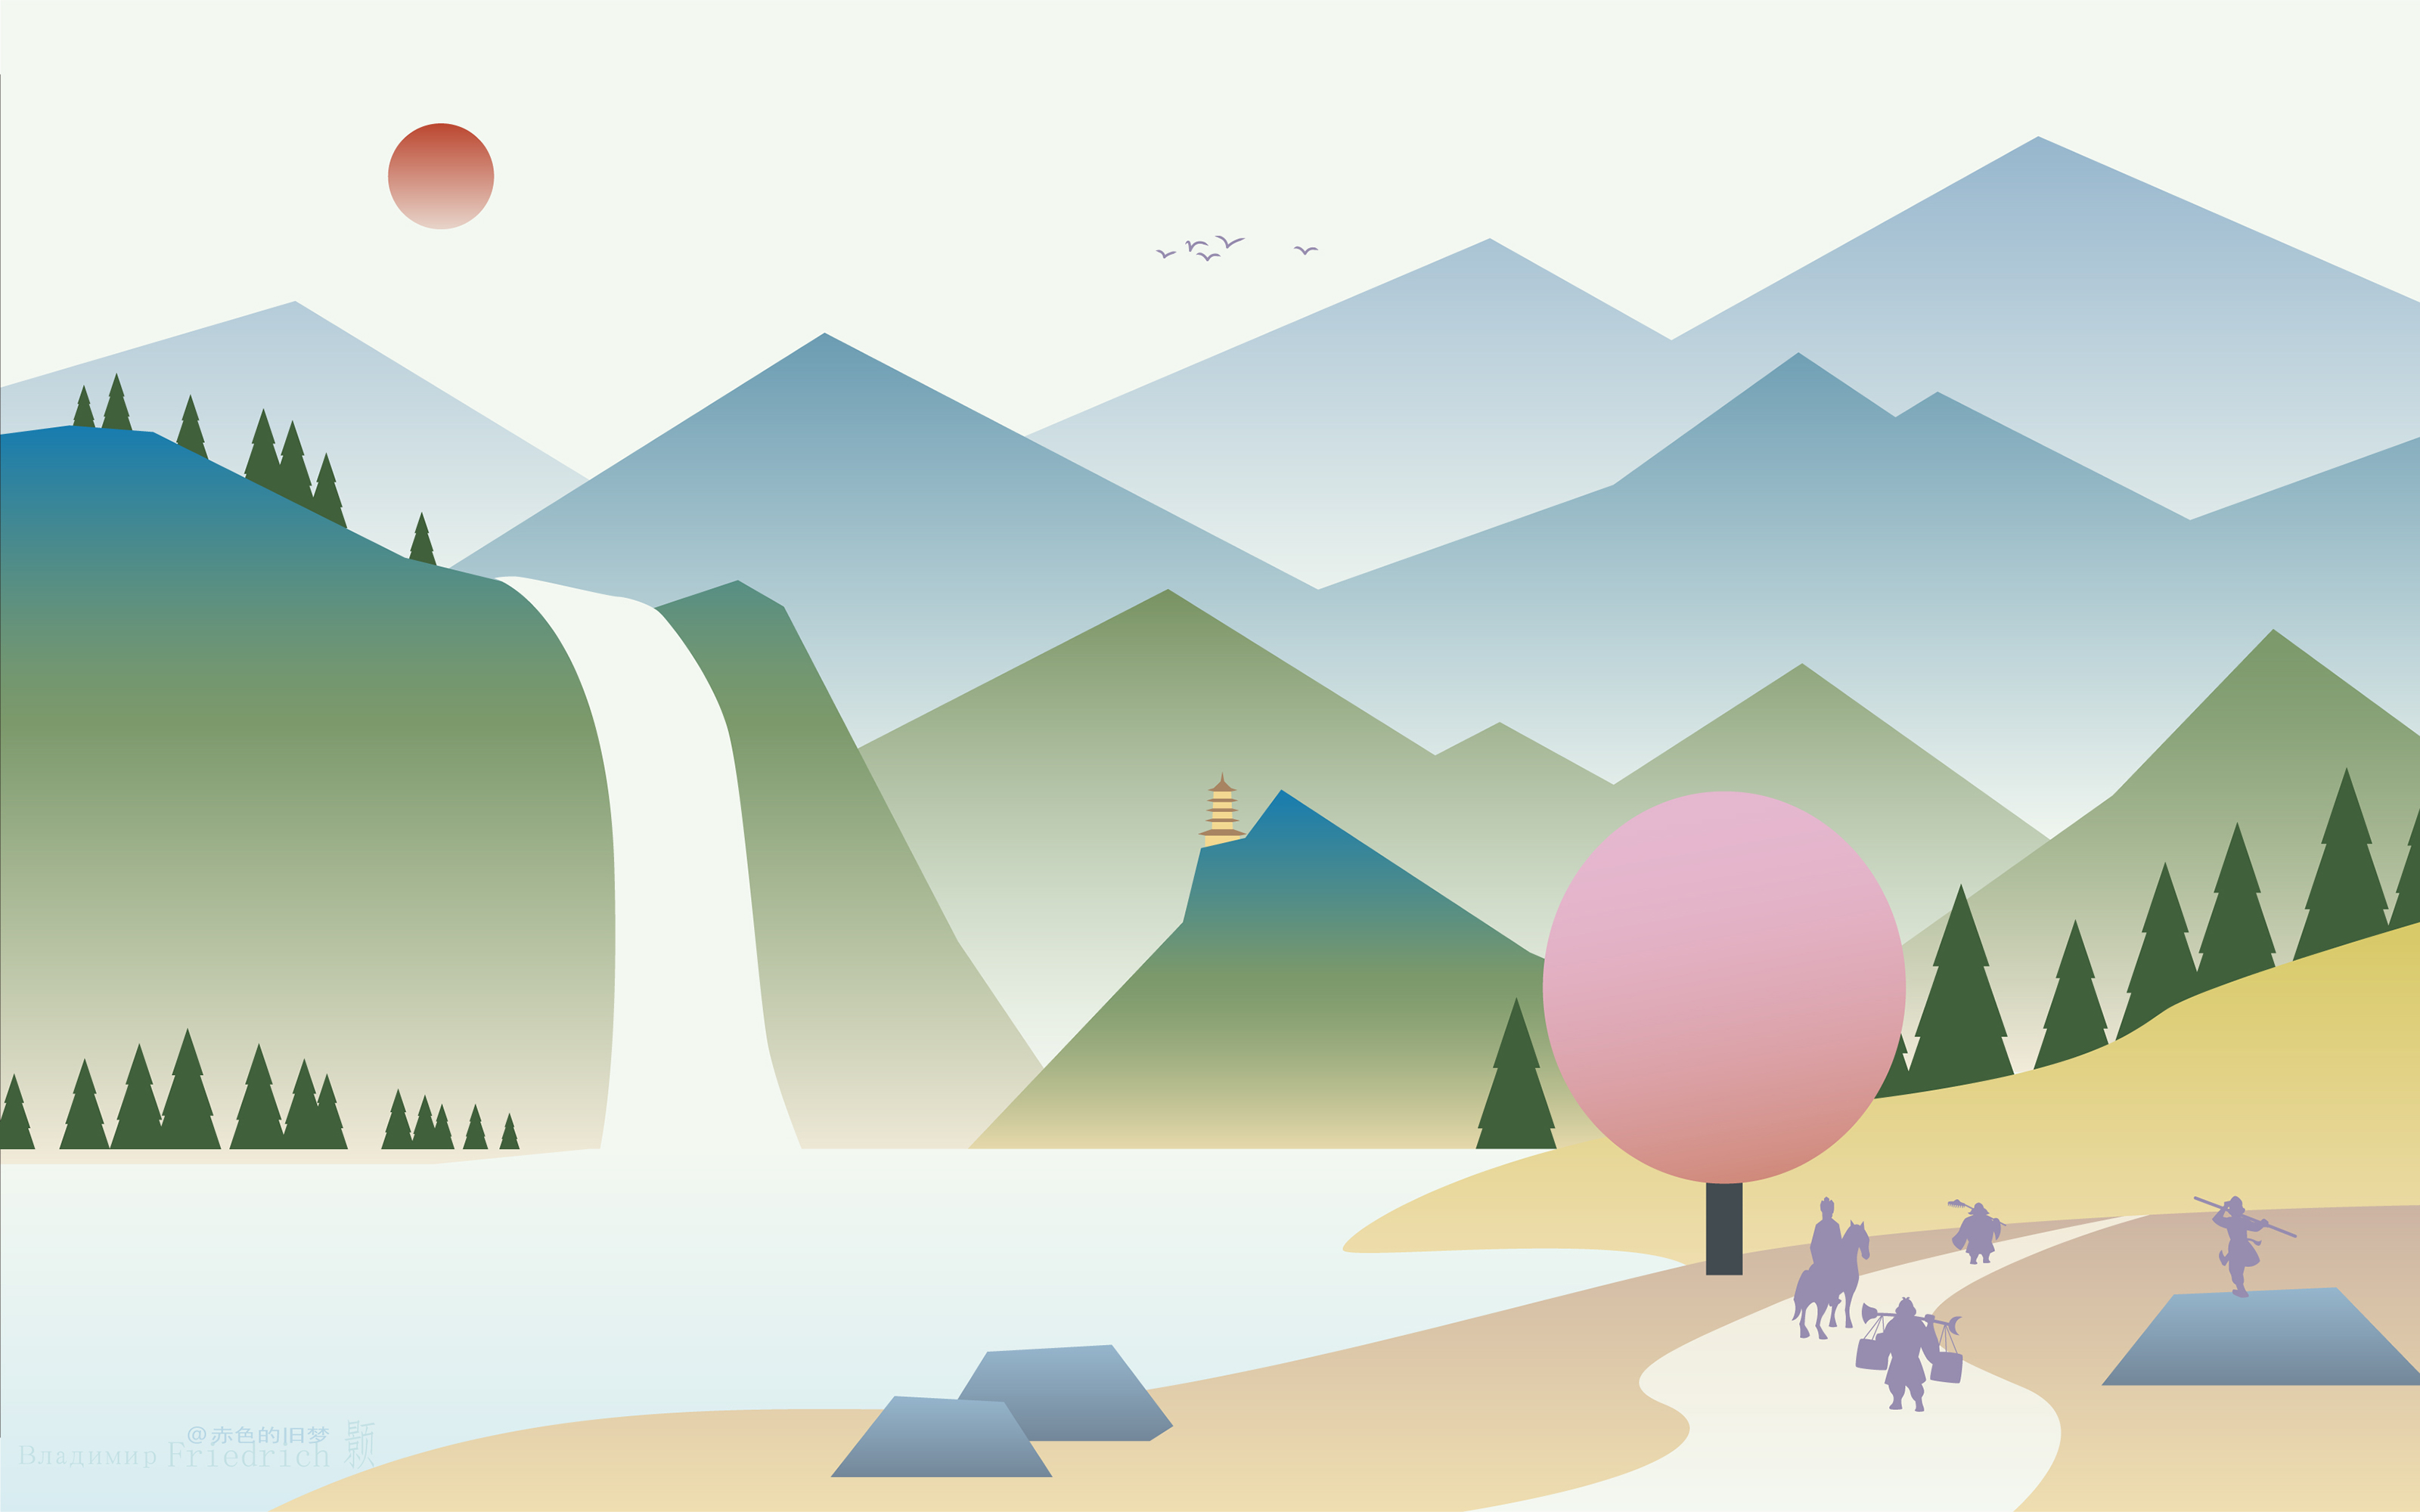 General 3200x2000 Flatdesign landscape Journey to the west waterfall mountains nature water trees digital art